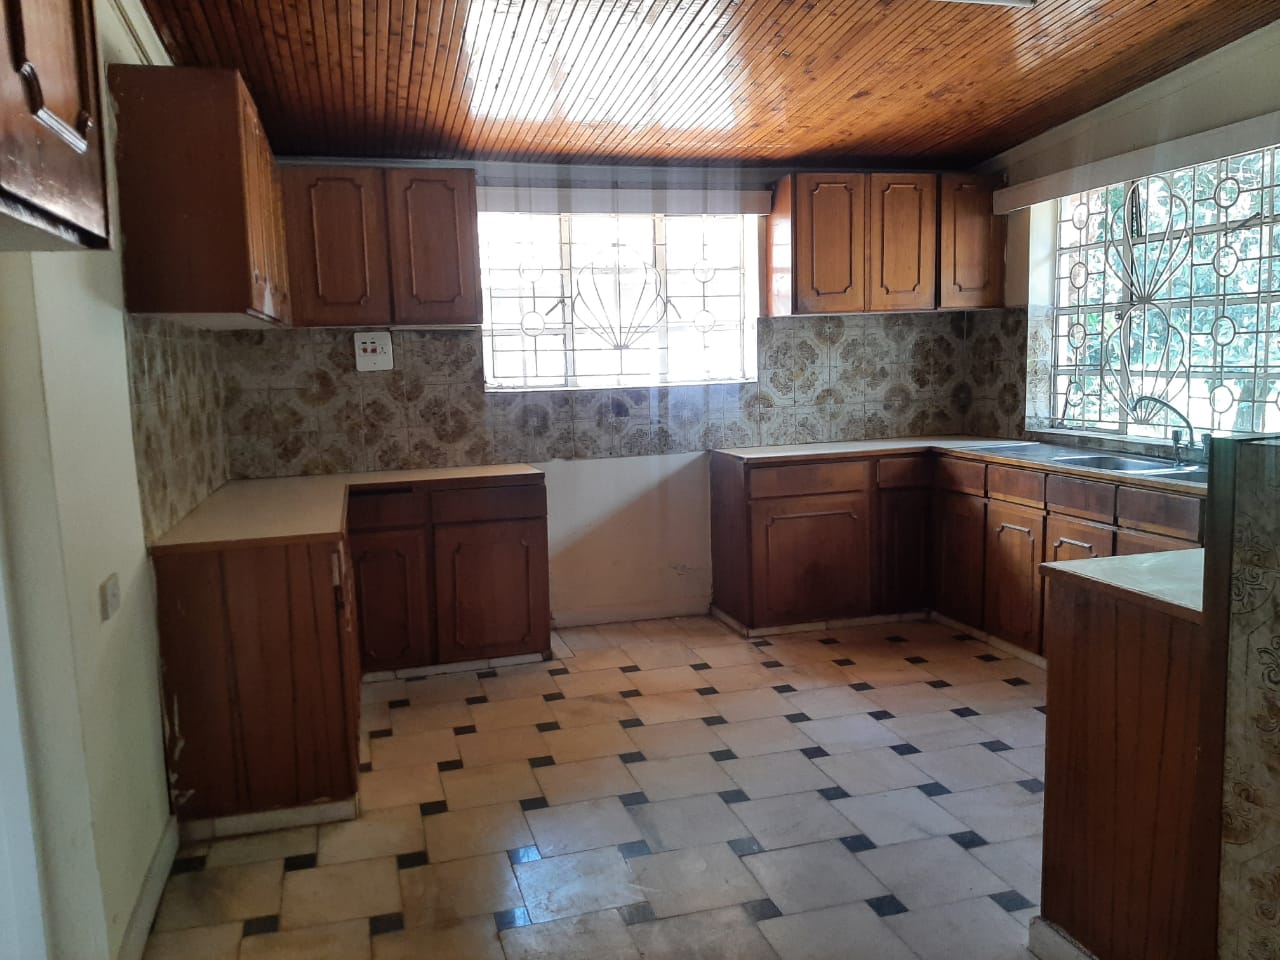 Spacious 4 Bedroom House for Rent at Ksh450k in its own compound in Lavington6